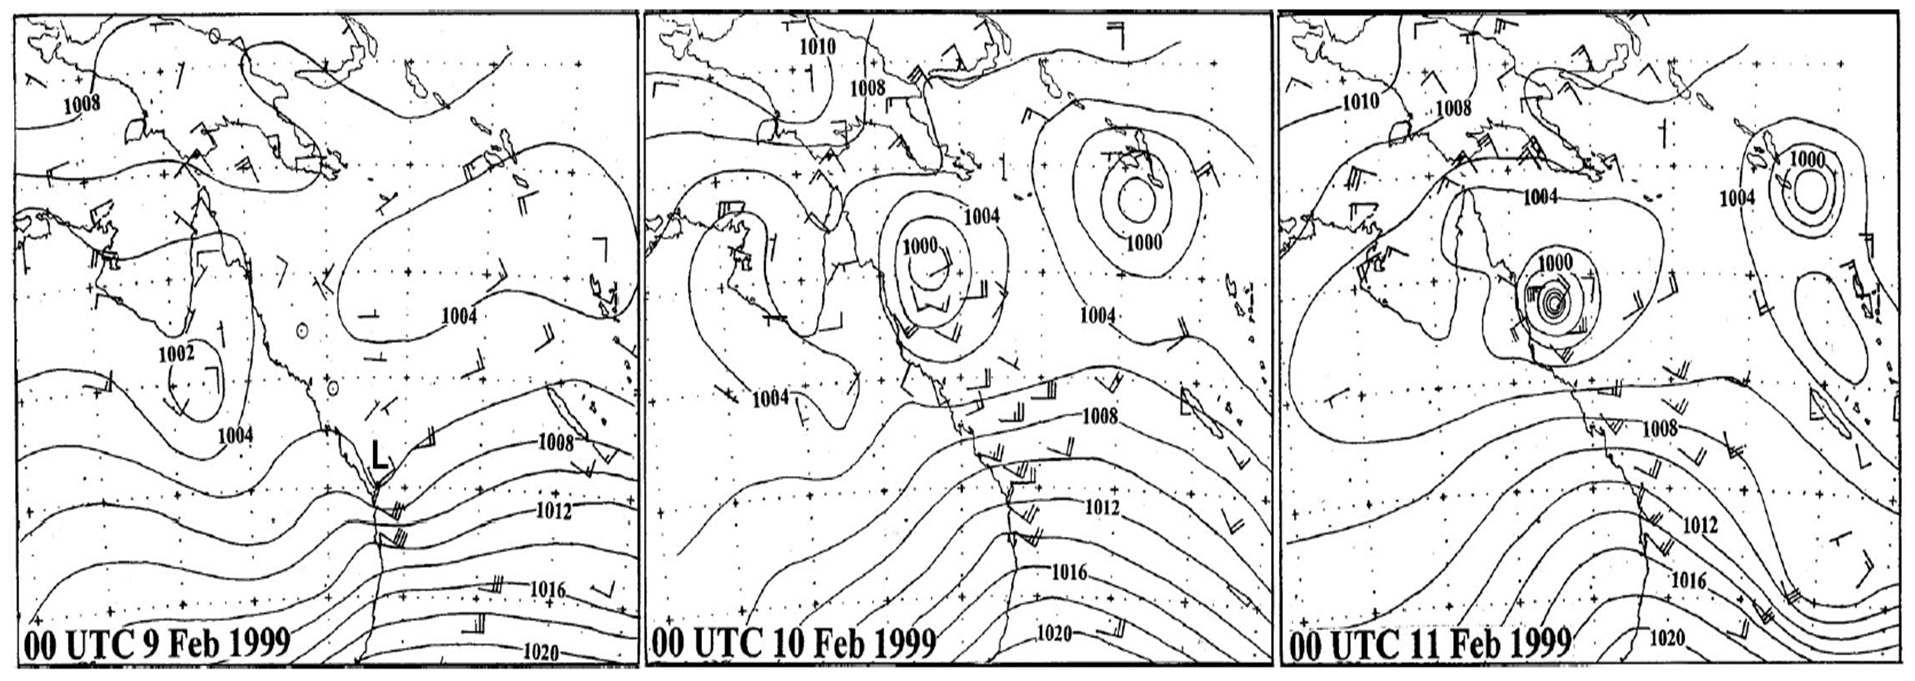 Mean sea level pressure analyses with wind observations from 9 February 1999